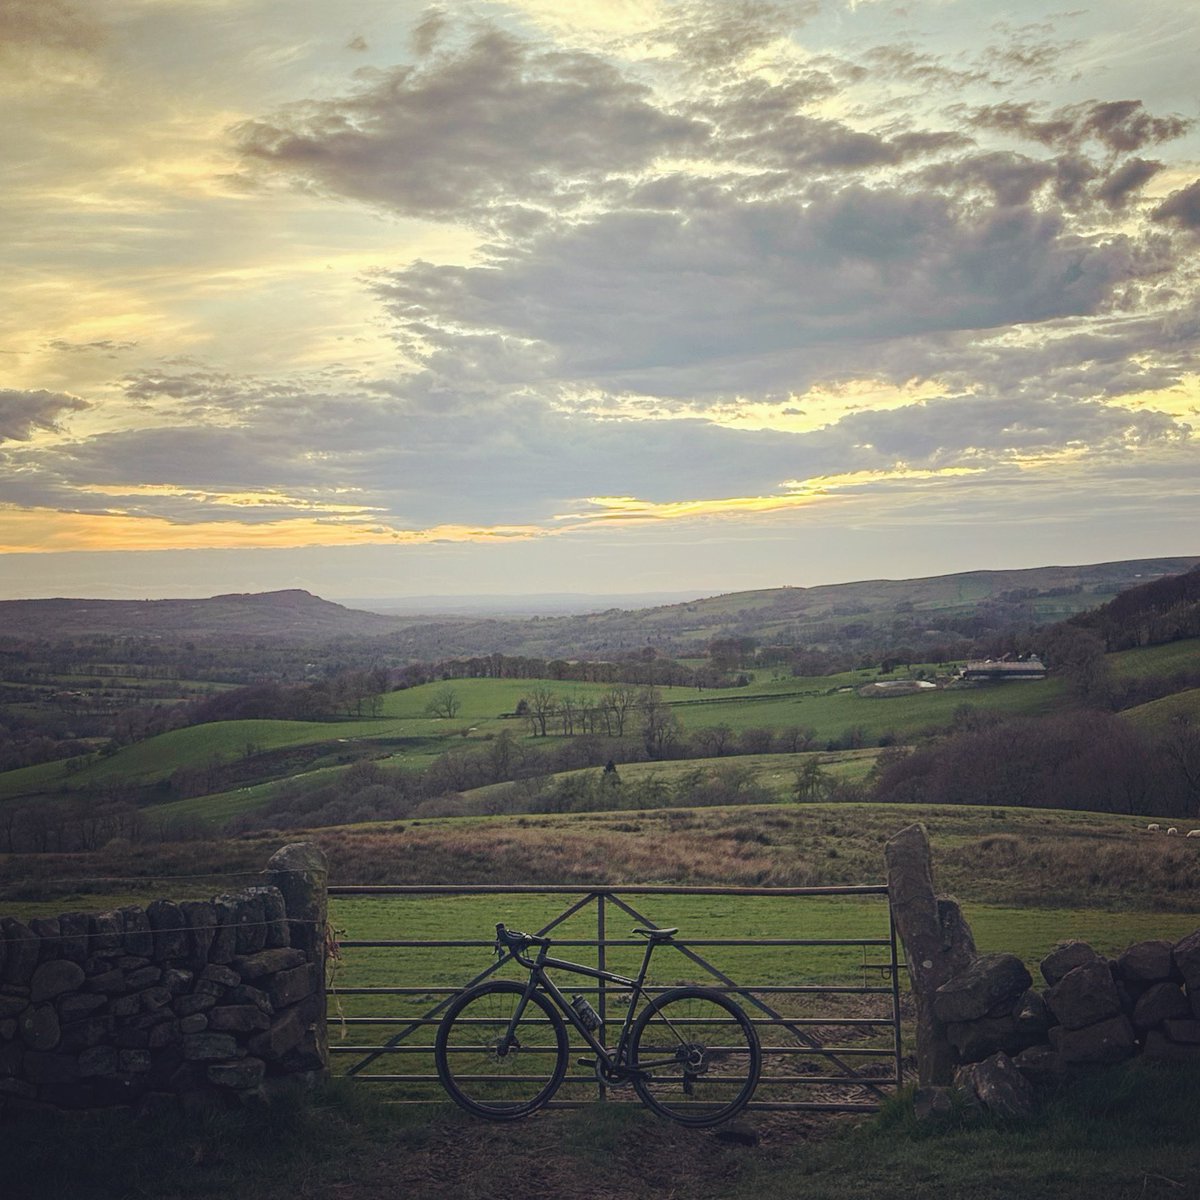 Friday night roll around the Roaches 🚴‍♂️